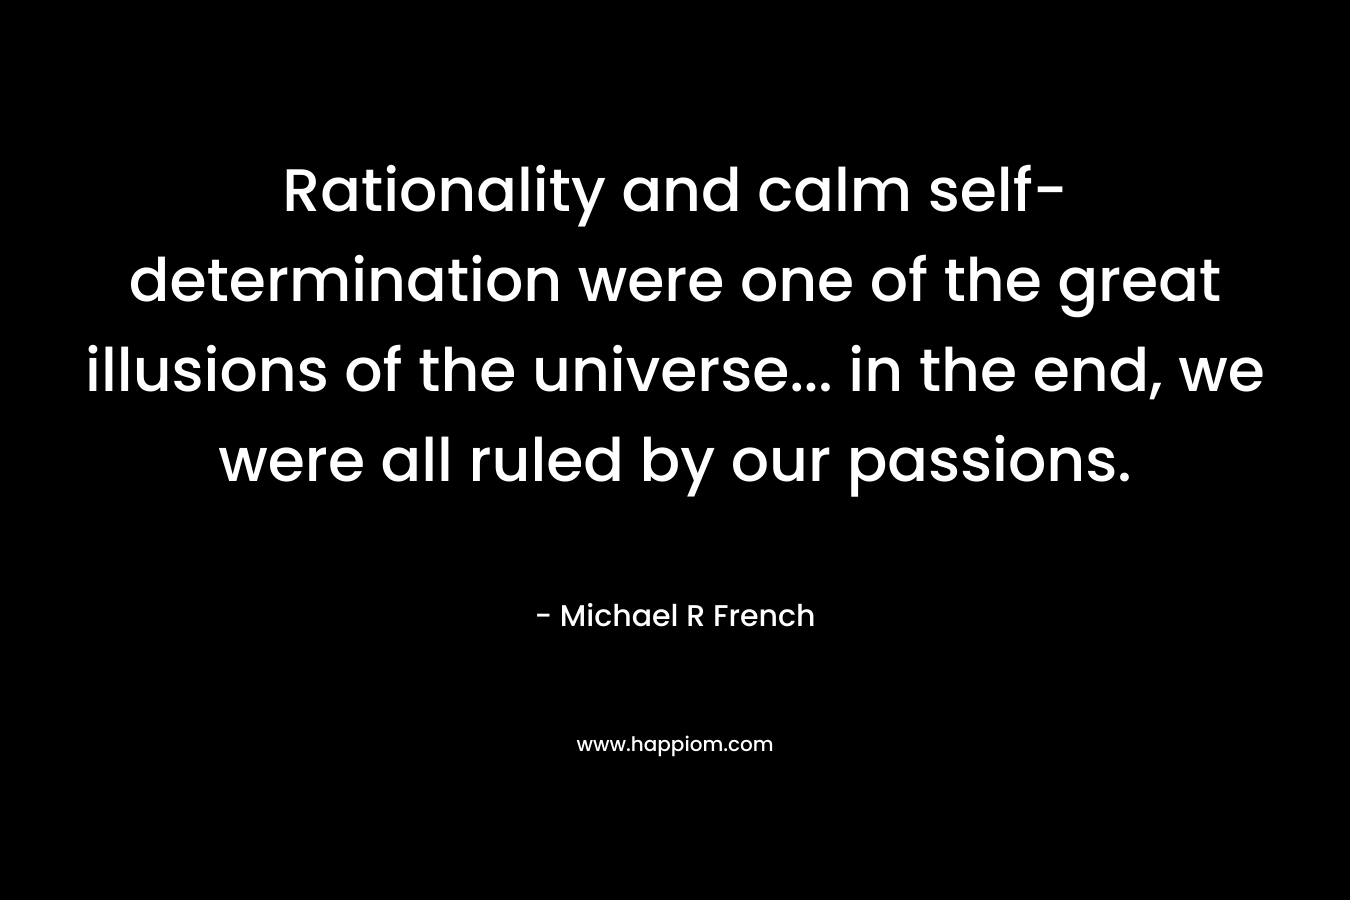 Rationality and calm self-determination were one of the great illusions of the universe... in the end, we were all ruled by our passions.